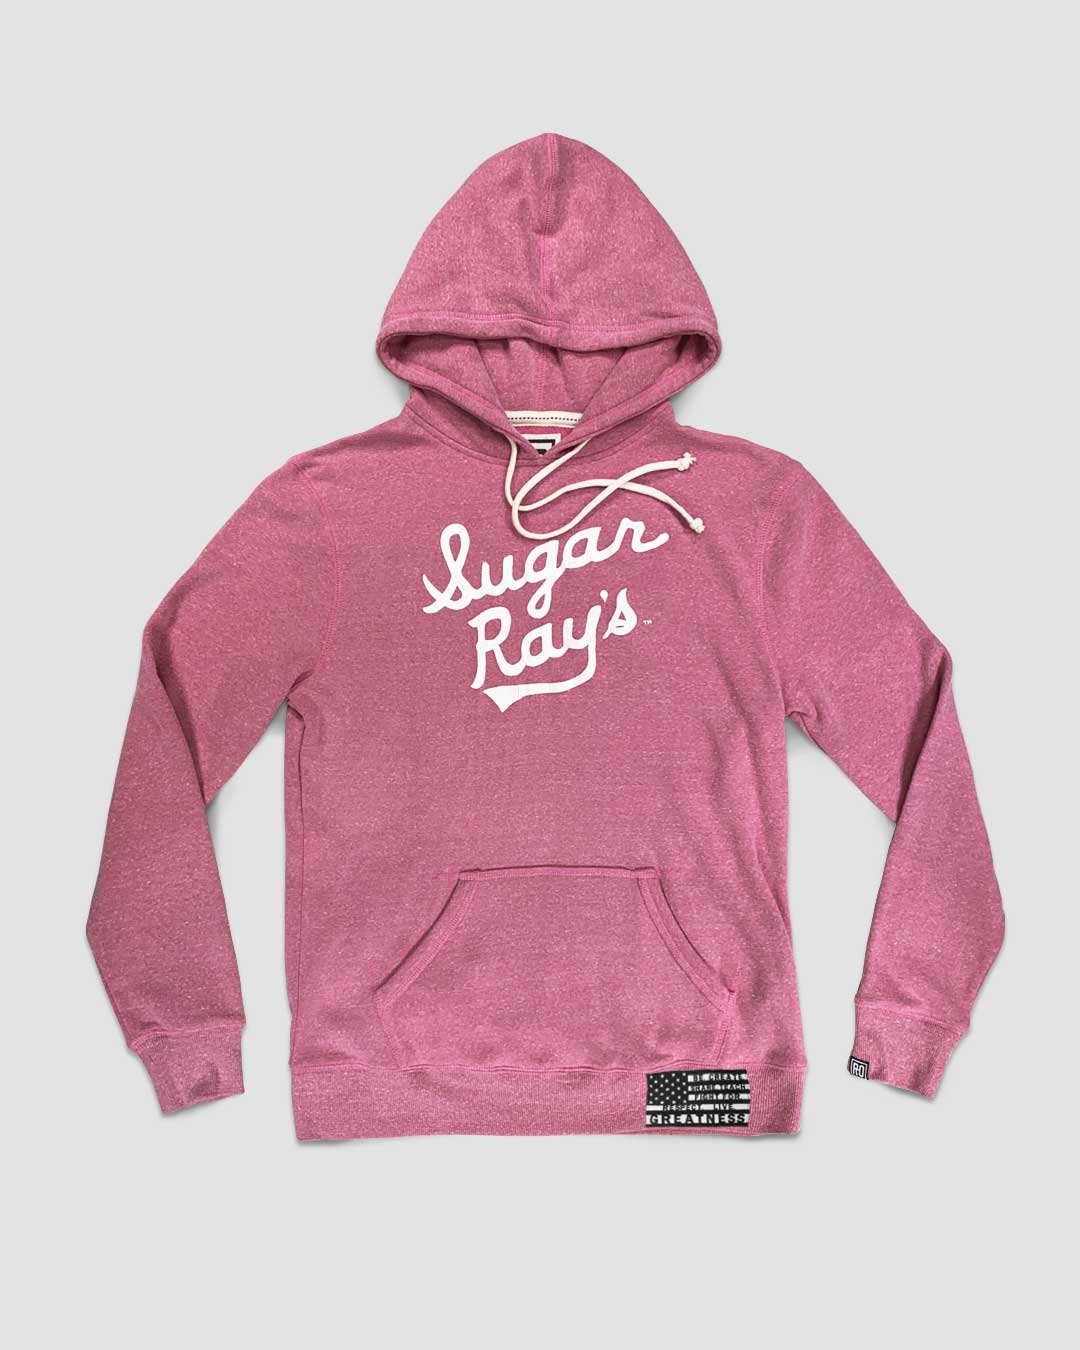 BHT - Sugar Ray Robinson Pullover Hoody - Roots of Fight